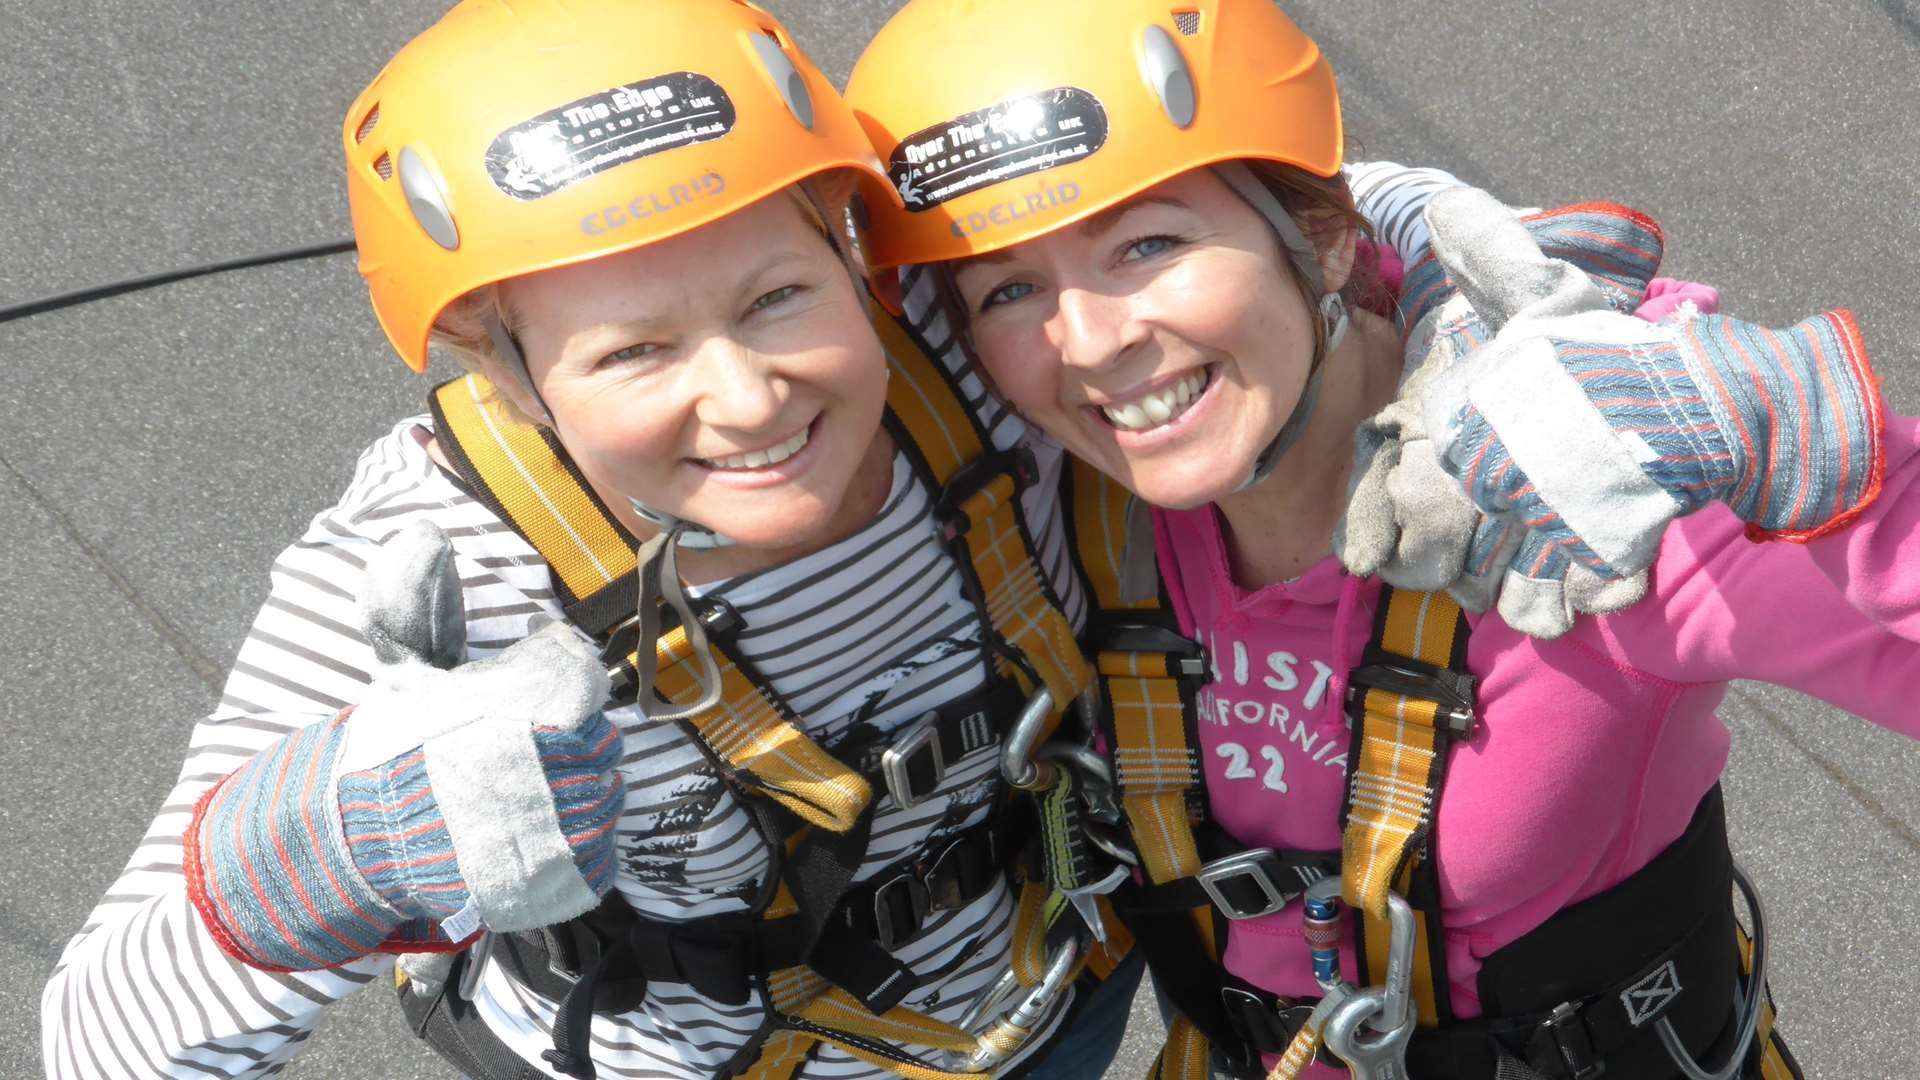 Fellow charitable organisations can use KM Charity Team events such as the Abseil Challenge to boost their fundraising efforts.